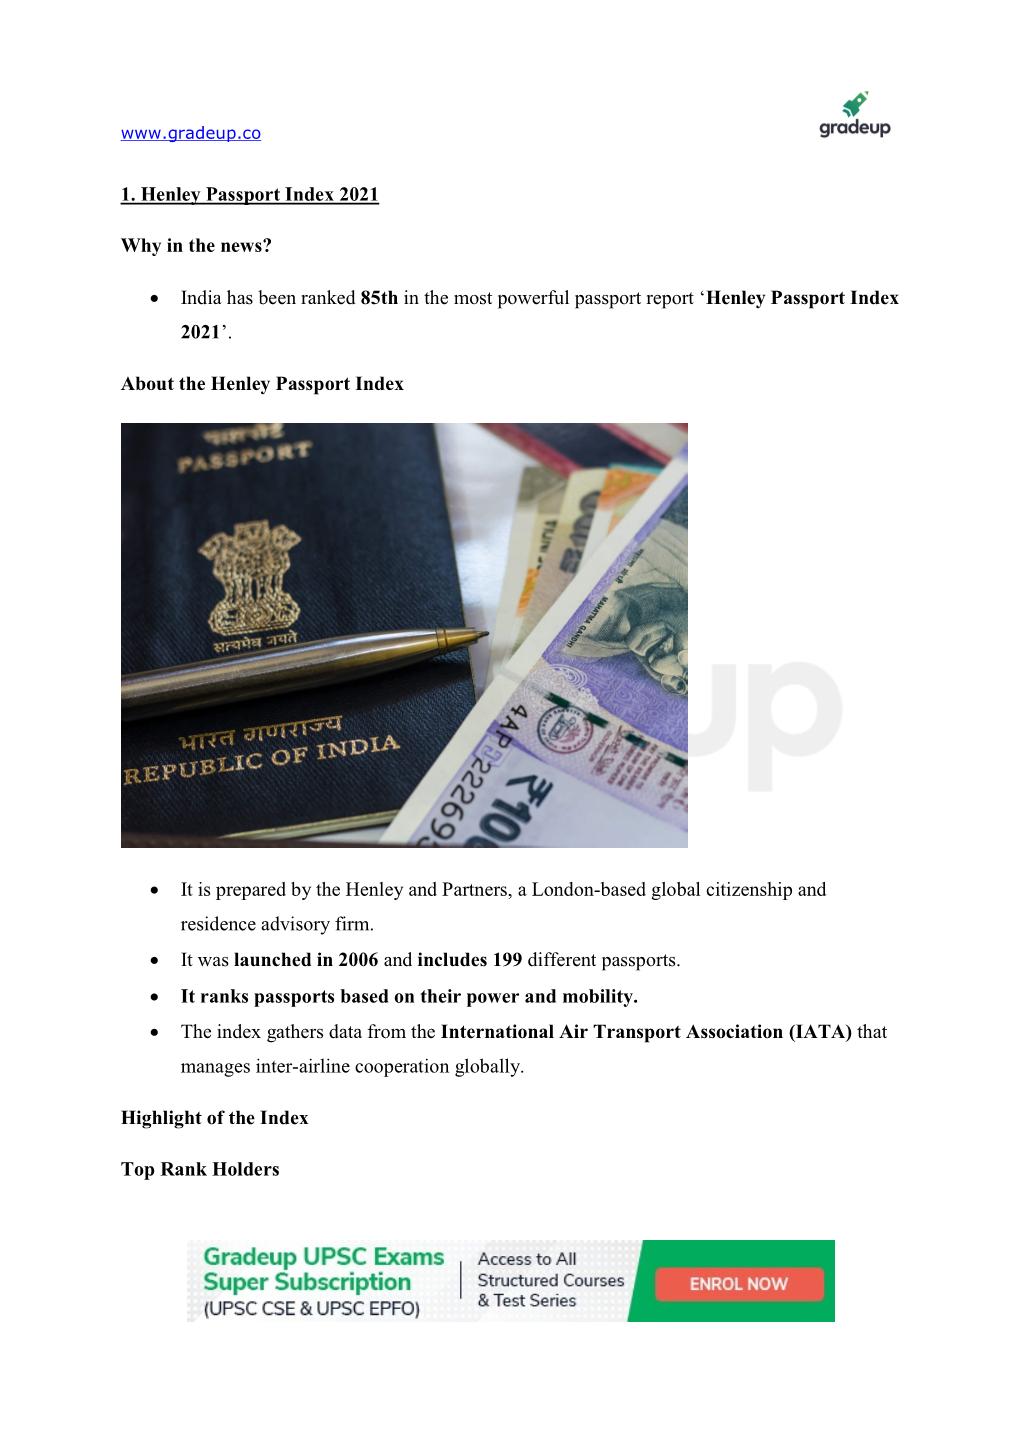 1. Henley Passport Index 2021 Why in the News?